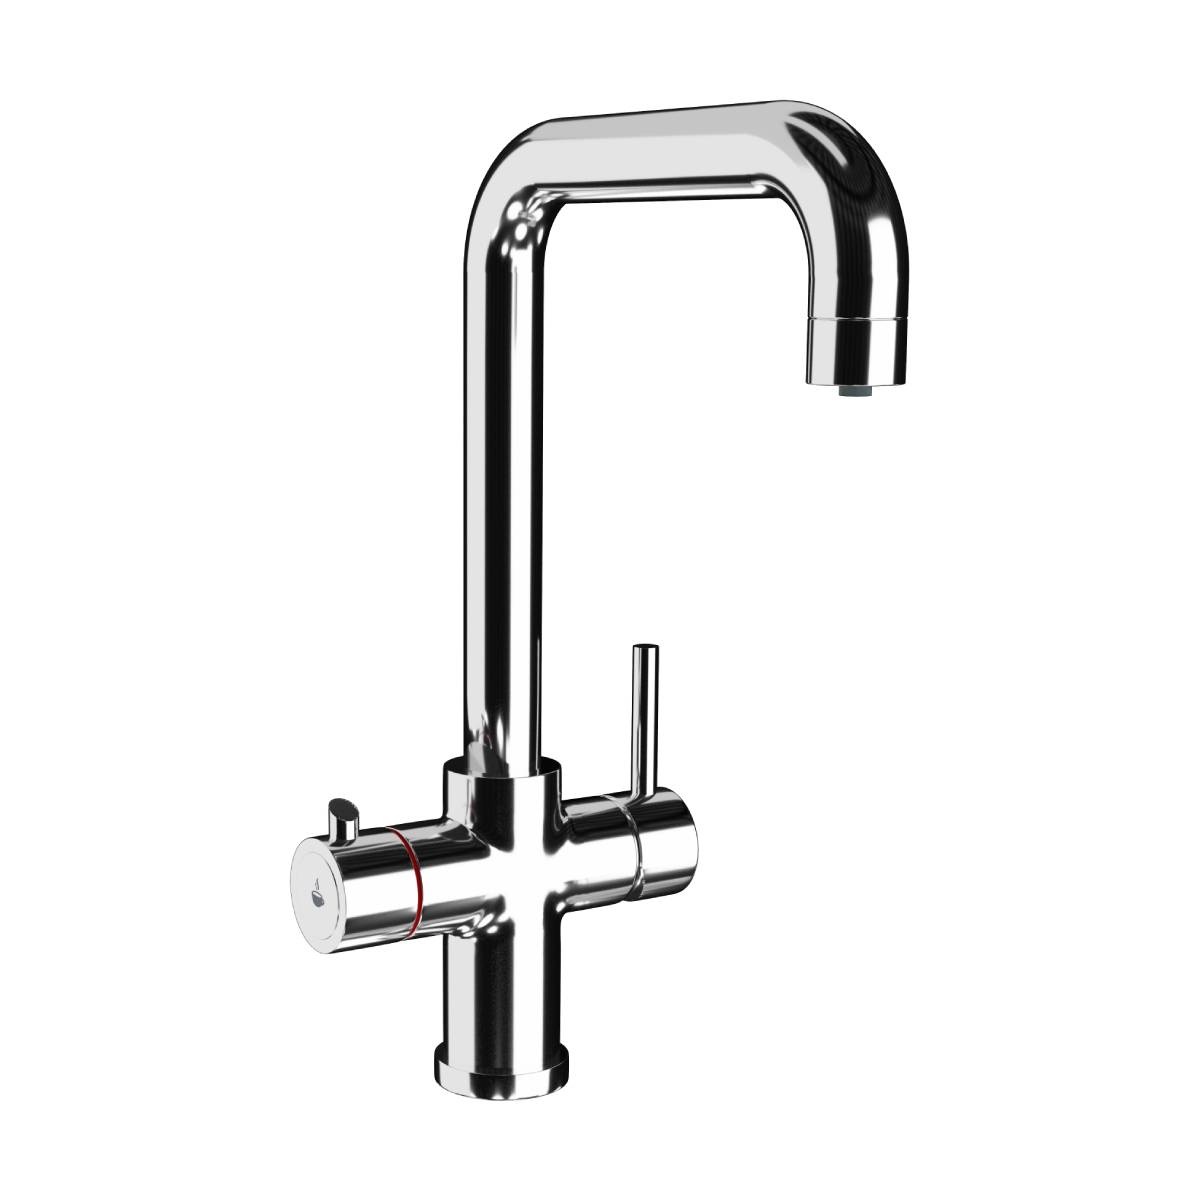 Ellsi 3-in-1 Instant Hot Water Tap with Boiler & Filter - Chrome (11674)